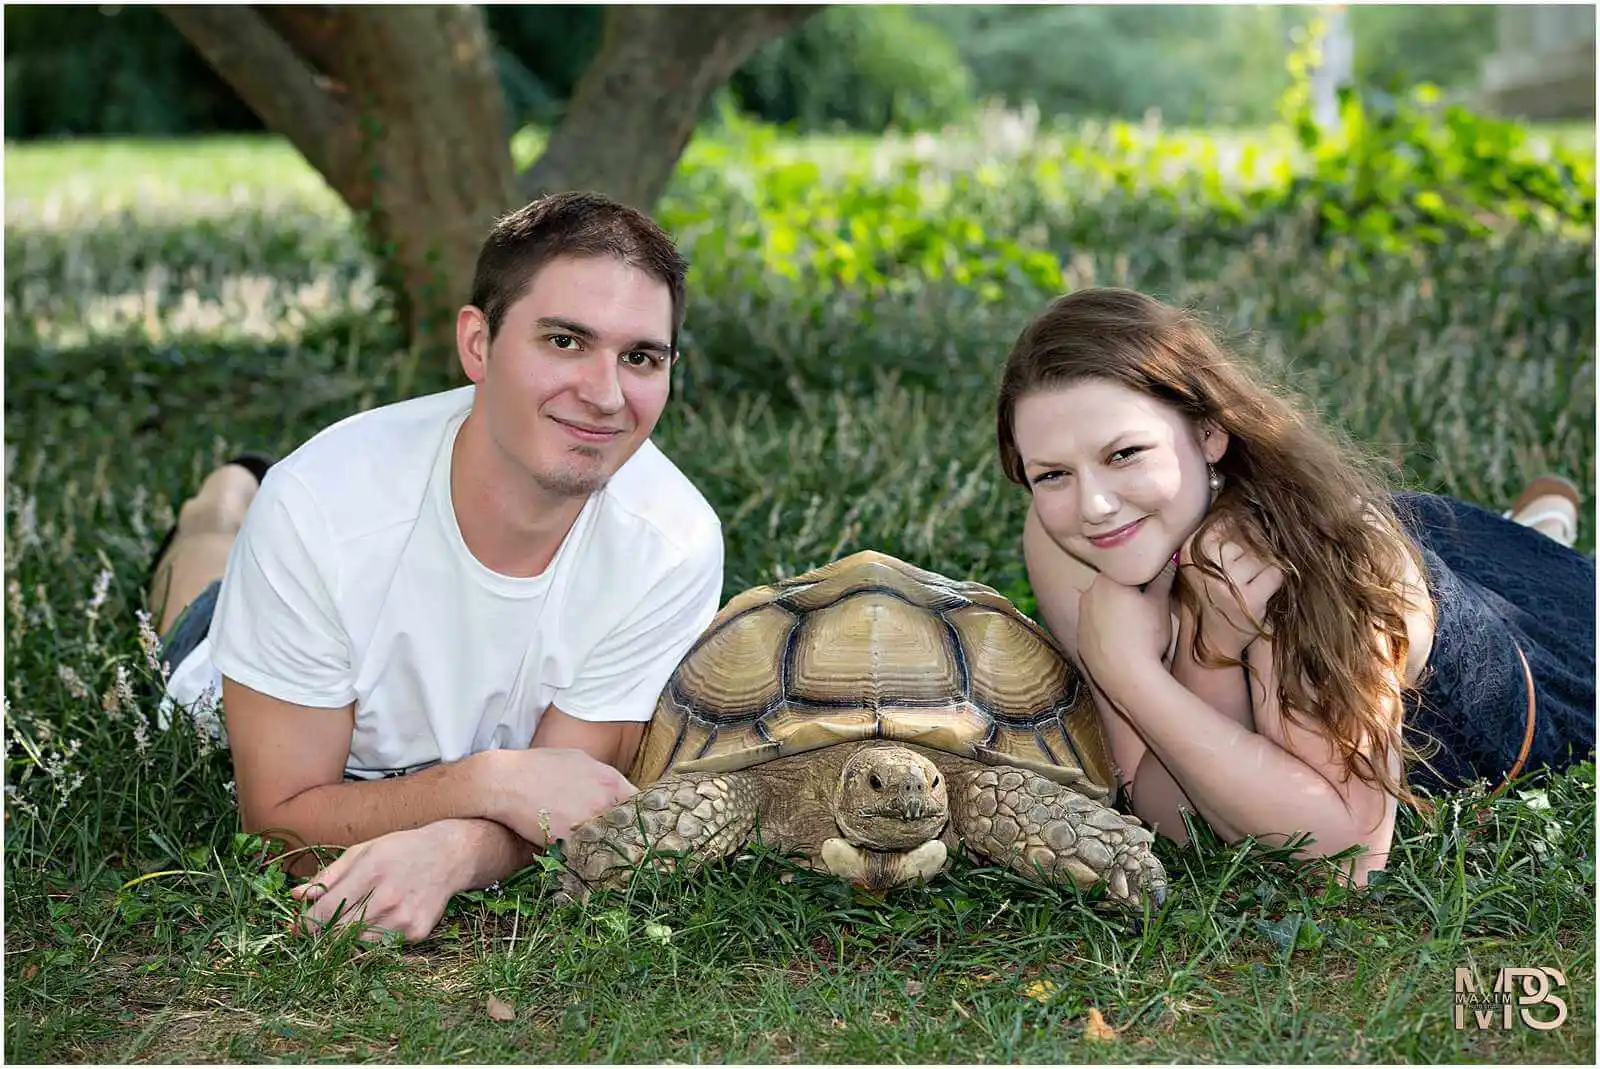 Happy couple posing with a pet tortoise outdoors.